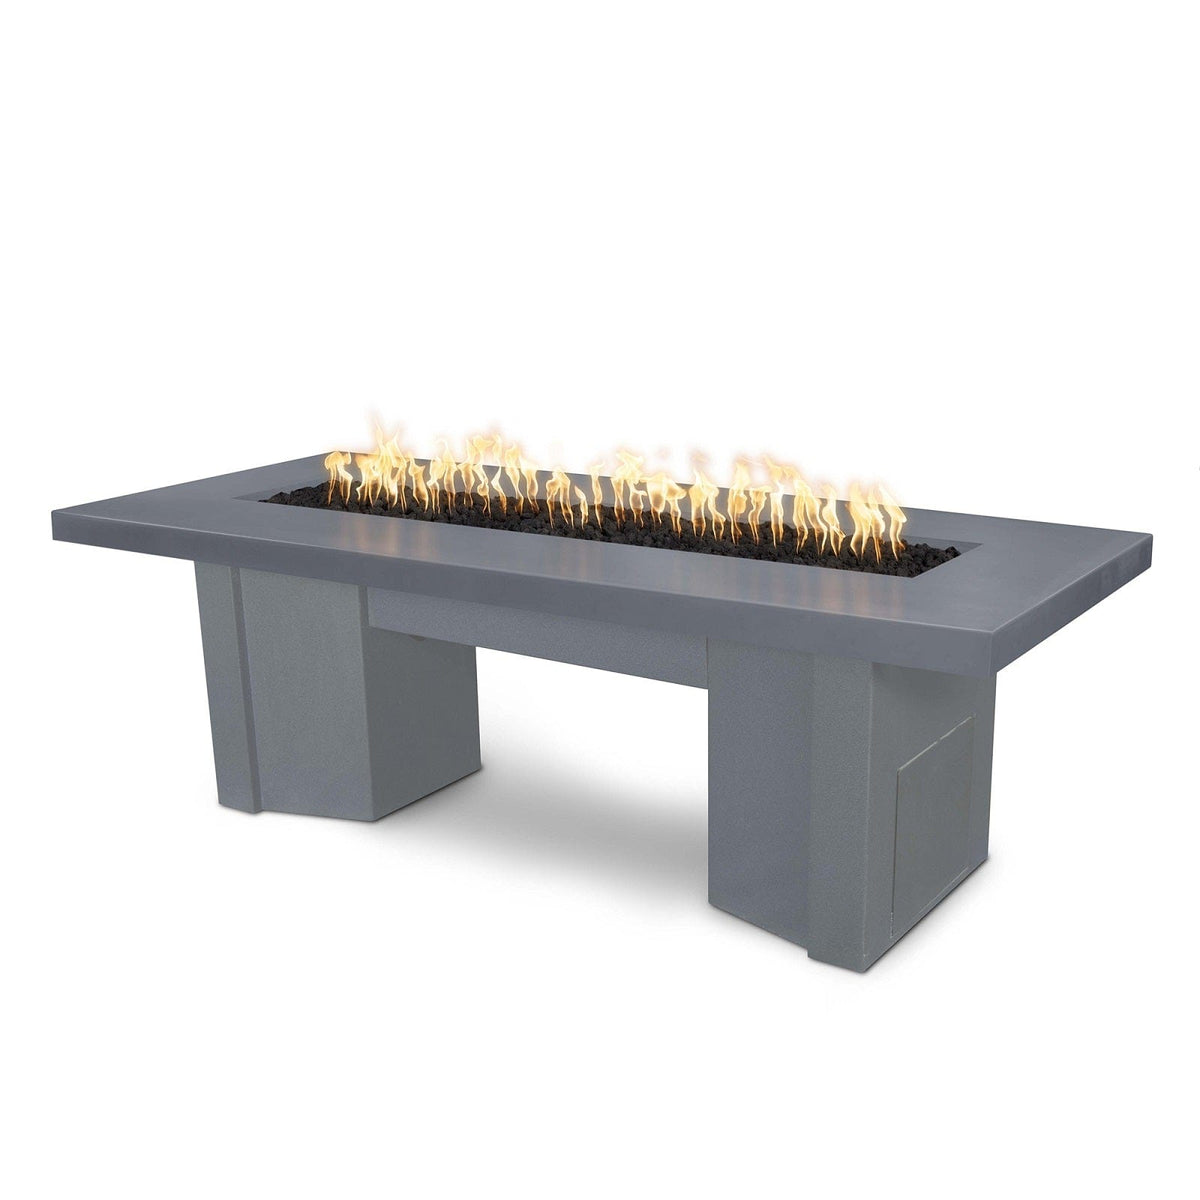 The Outdoor Plus Fire Features Gray (-GRY) / Gray Powder Coated Steel (-GRY) The Outdoor Plus 60&quot; Alameda Fire Table Smooth Concrete in Natural Gas - 110V Plug &amp; Play Electronic Ignition / OPT-ALMGFRC60EKIT-NG